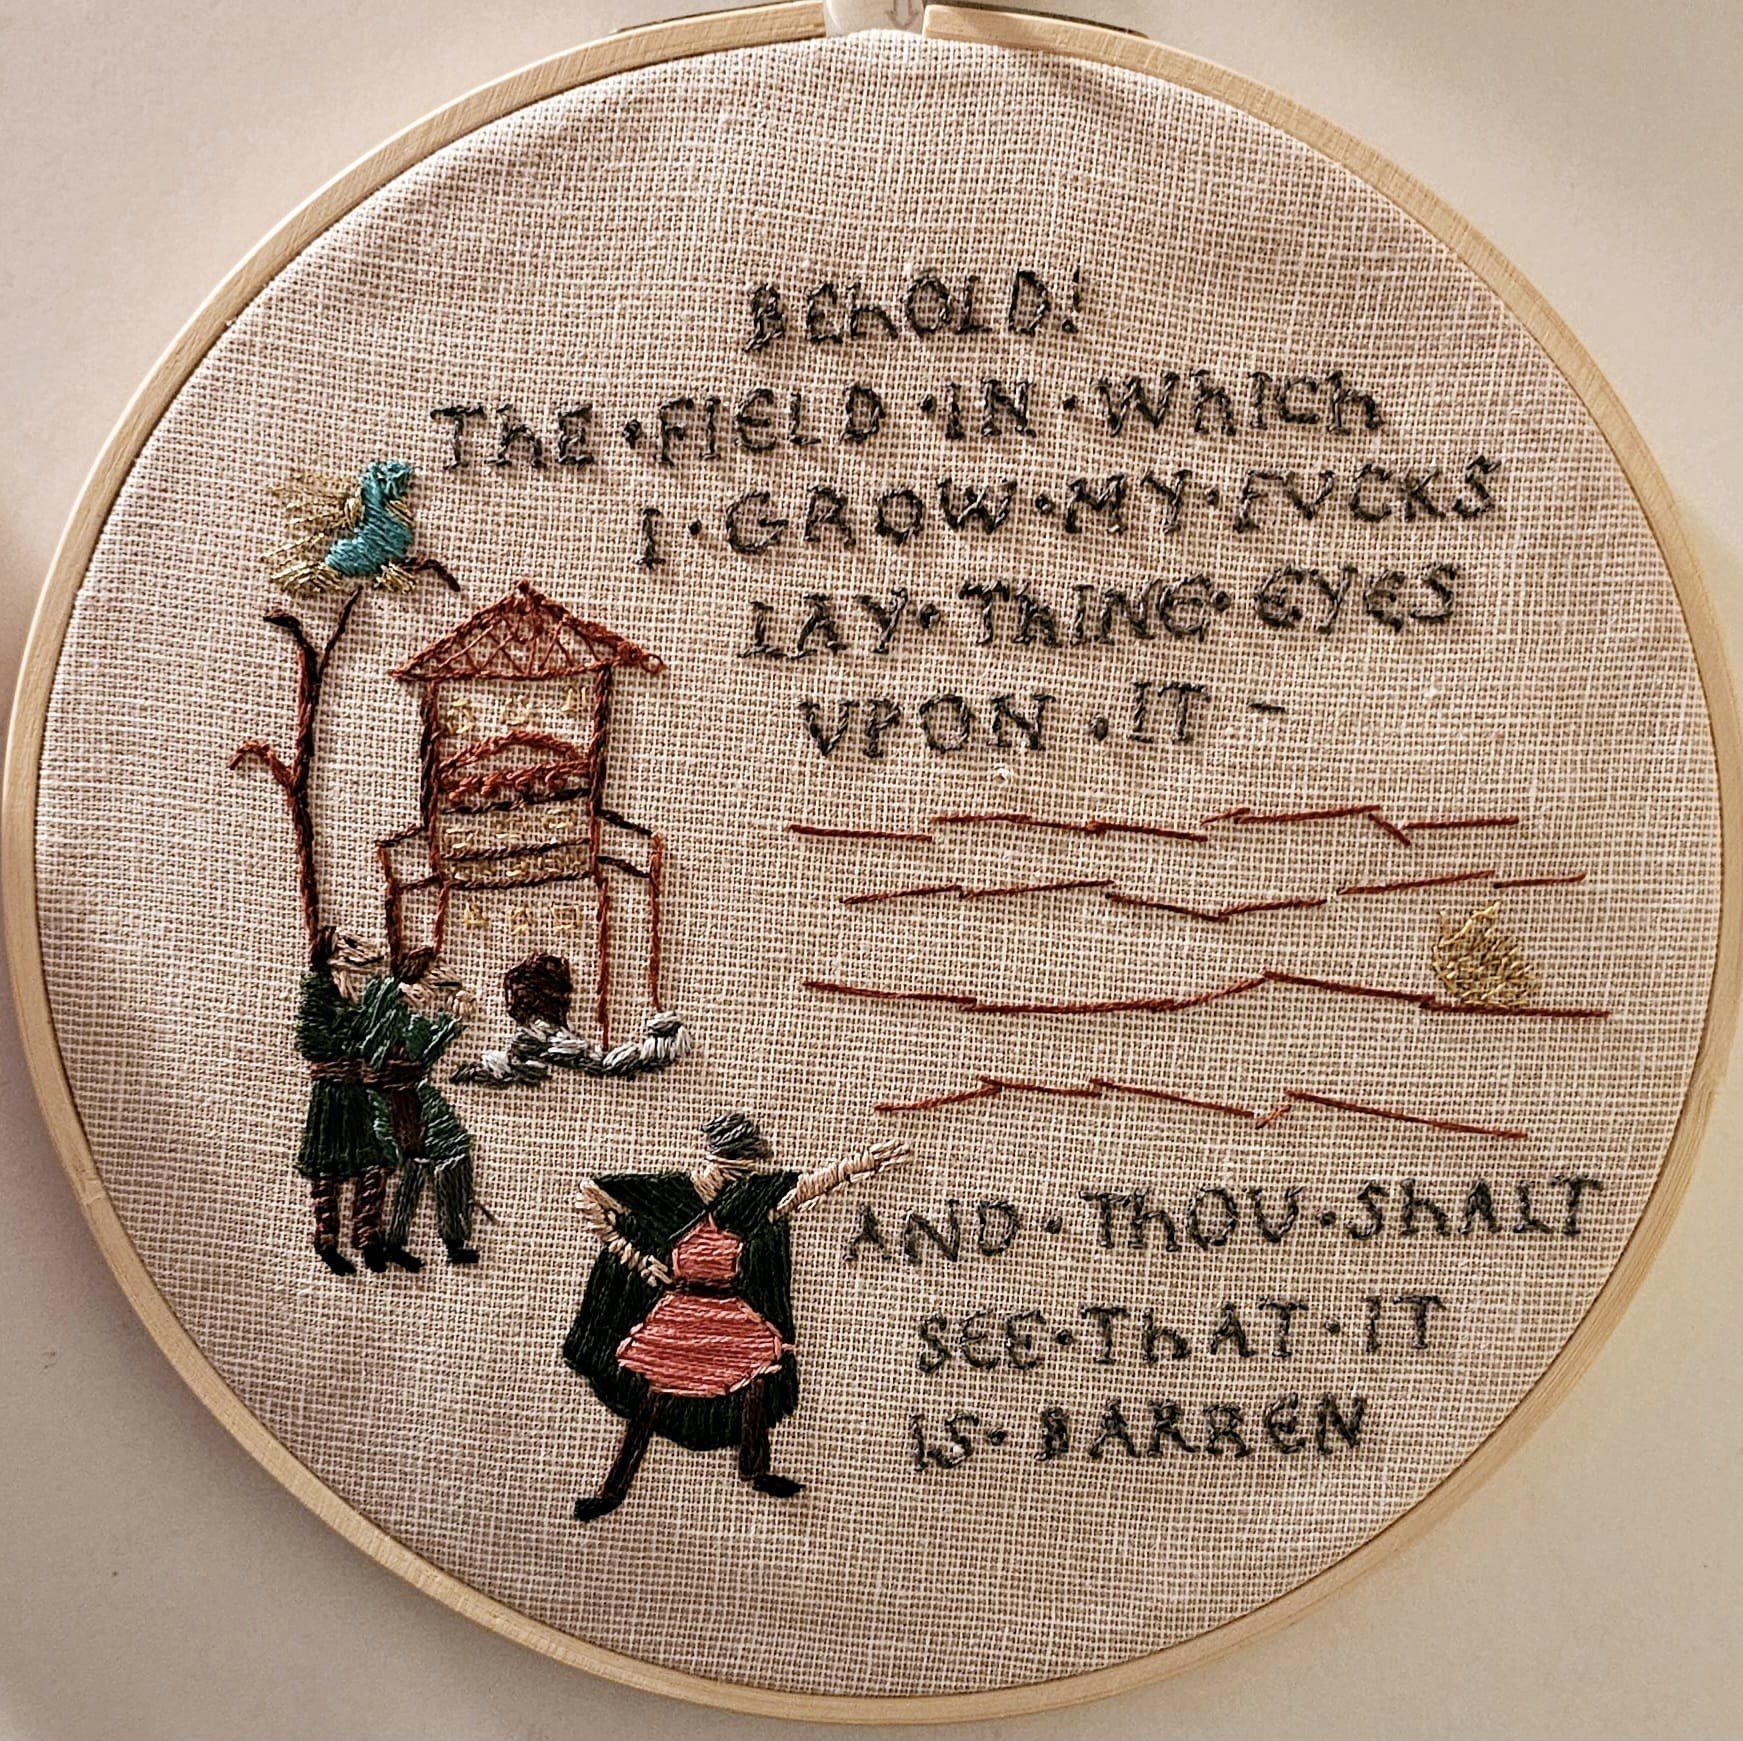 Circular needlework showing Bayeux tapestry style characters and buildings, and in Bayeux style lettering says Behold the field in which I grow my fucks lay thine eyes upon it - and thou shalt see that it is barren